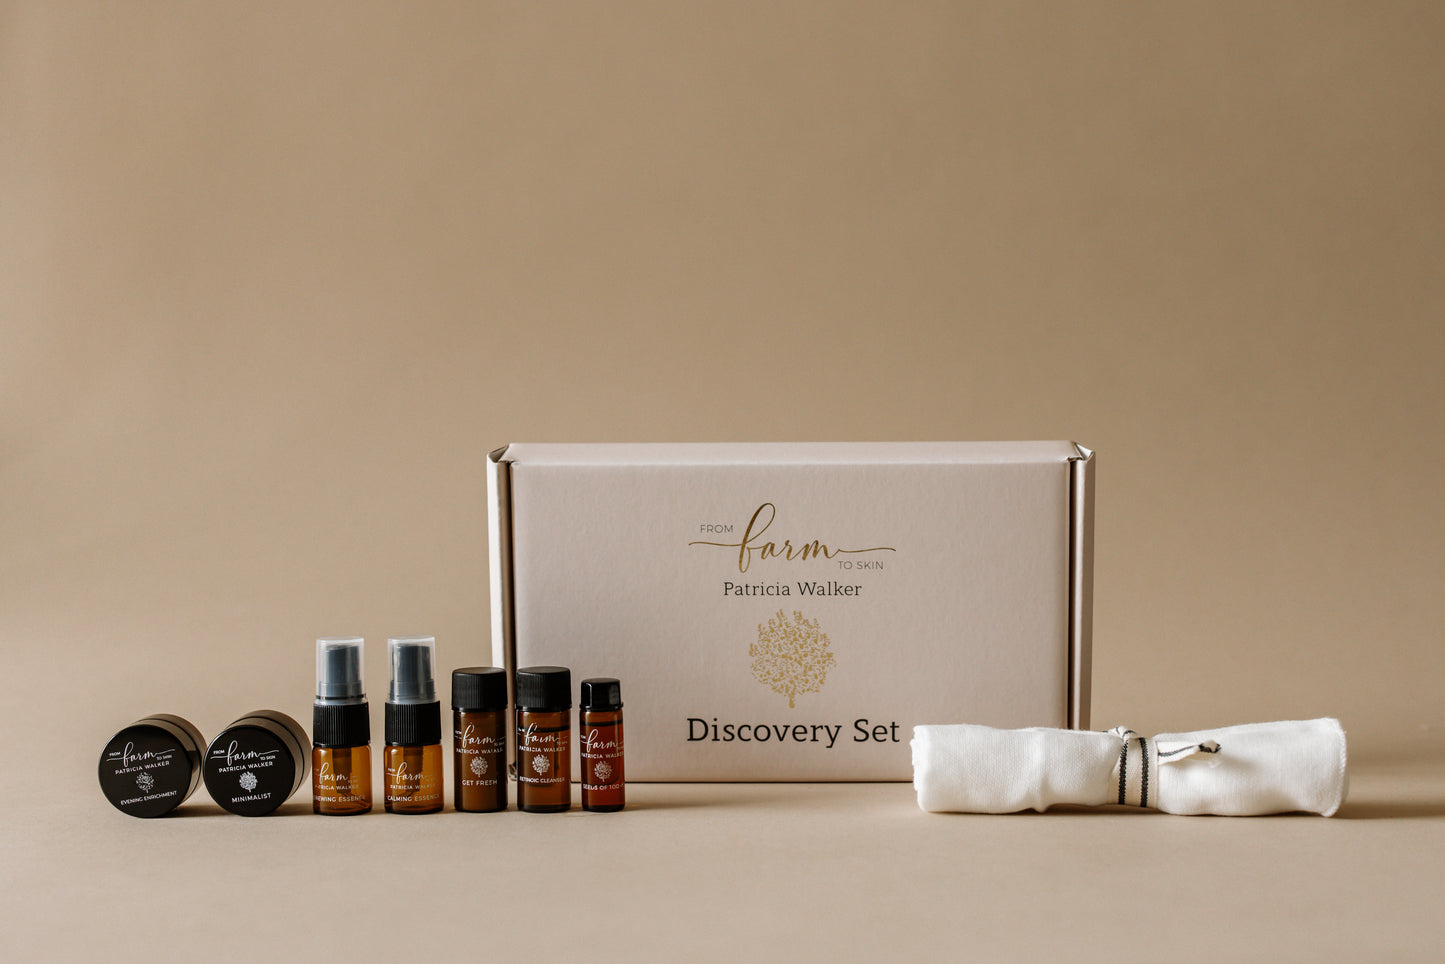 Sample Discovery Set